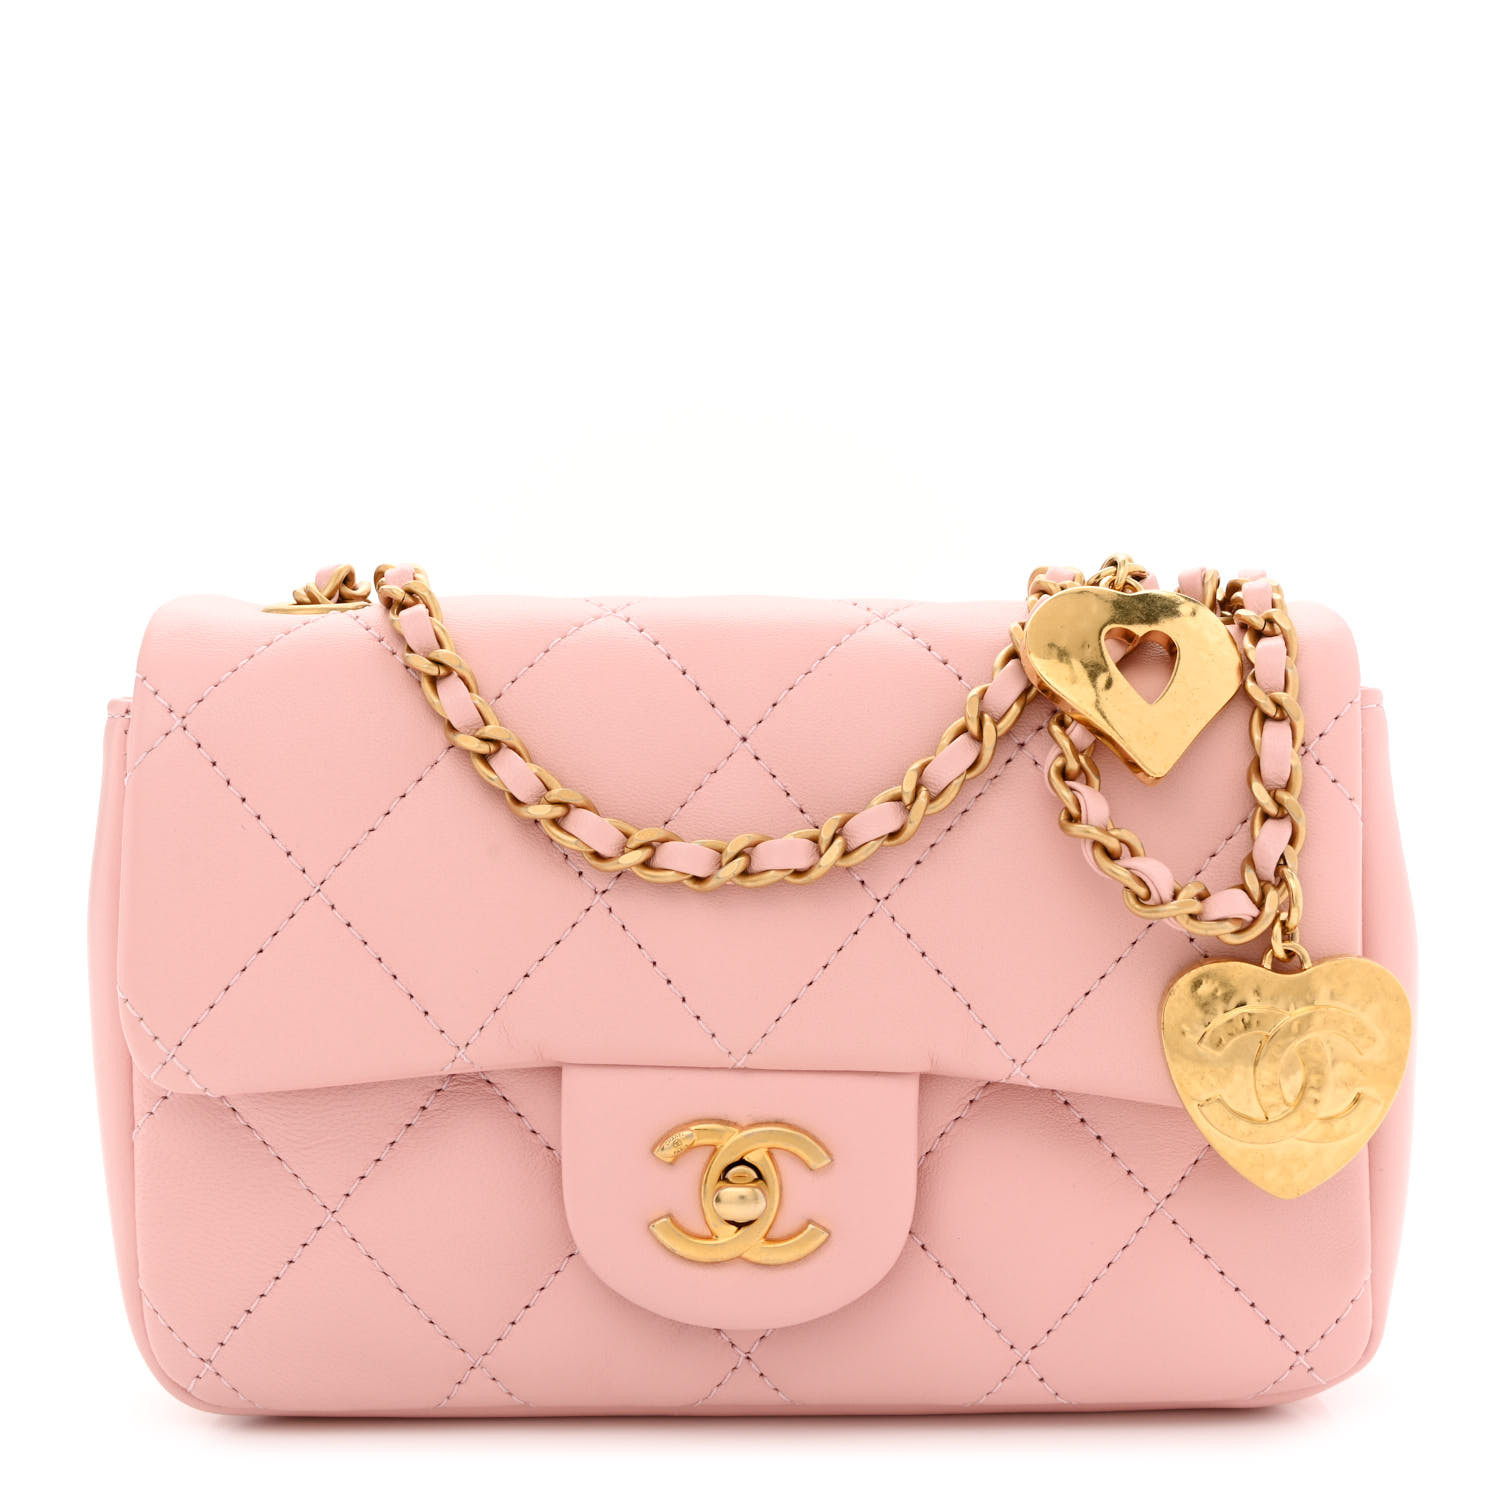 image of CHANEL Lambskin Quilted Heart Charms Mini Flap in the color Light Pink by FASHIONPHILE